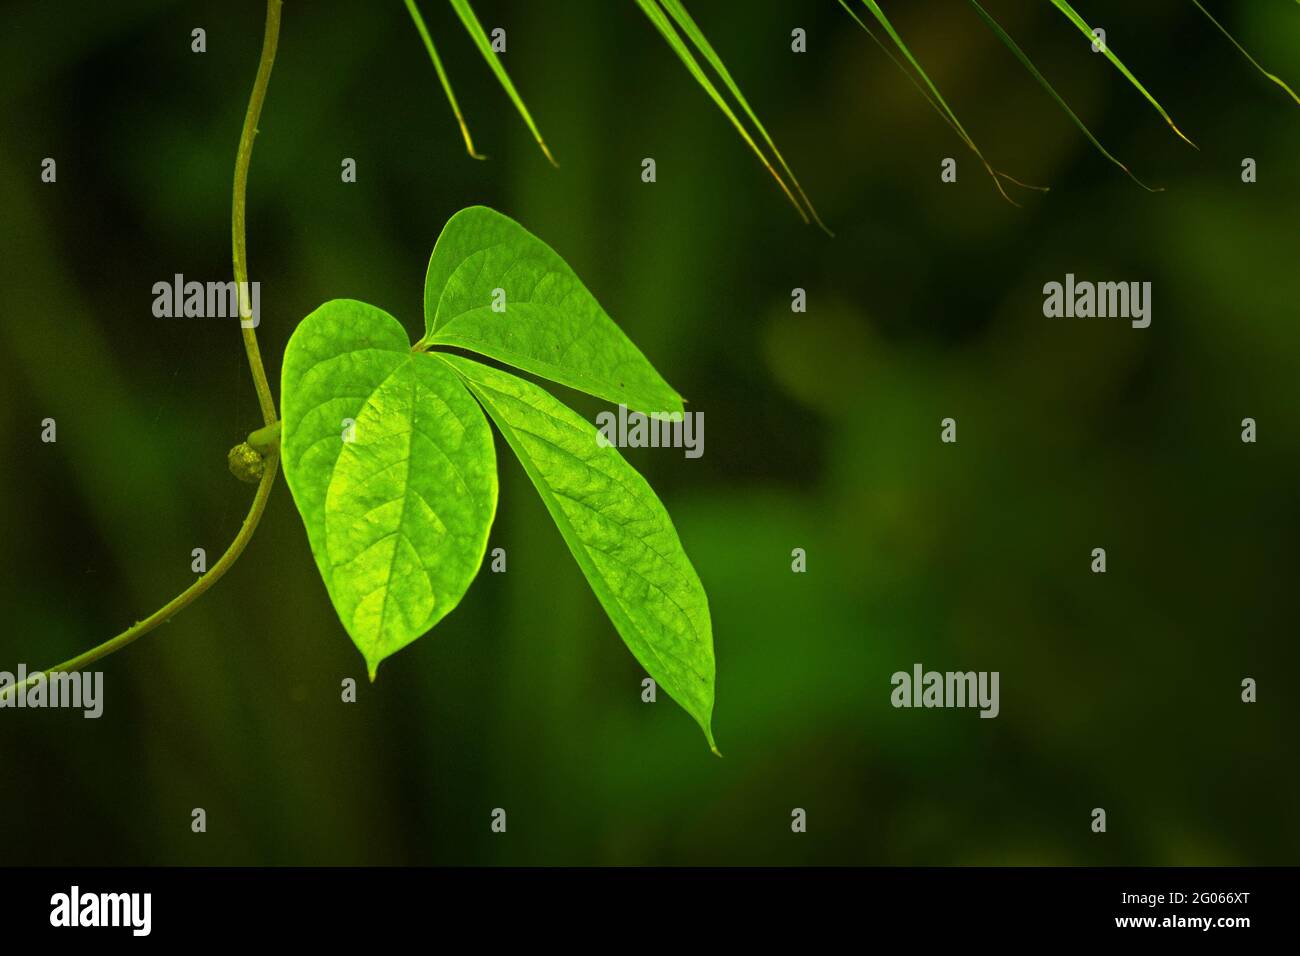 Green leaves, texture of nature, stock photograph with natural background Stock Photo